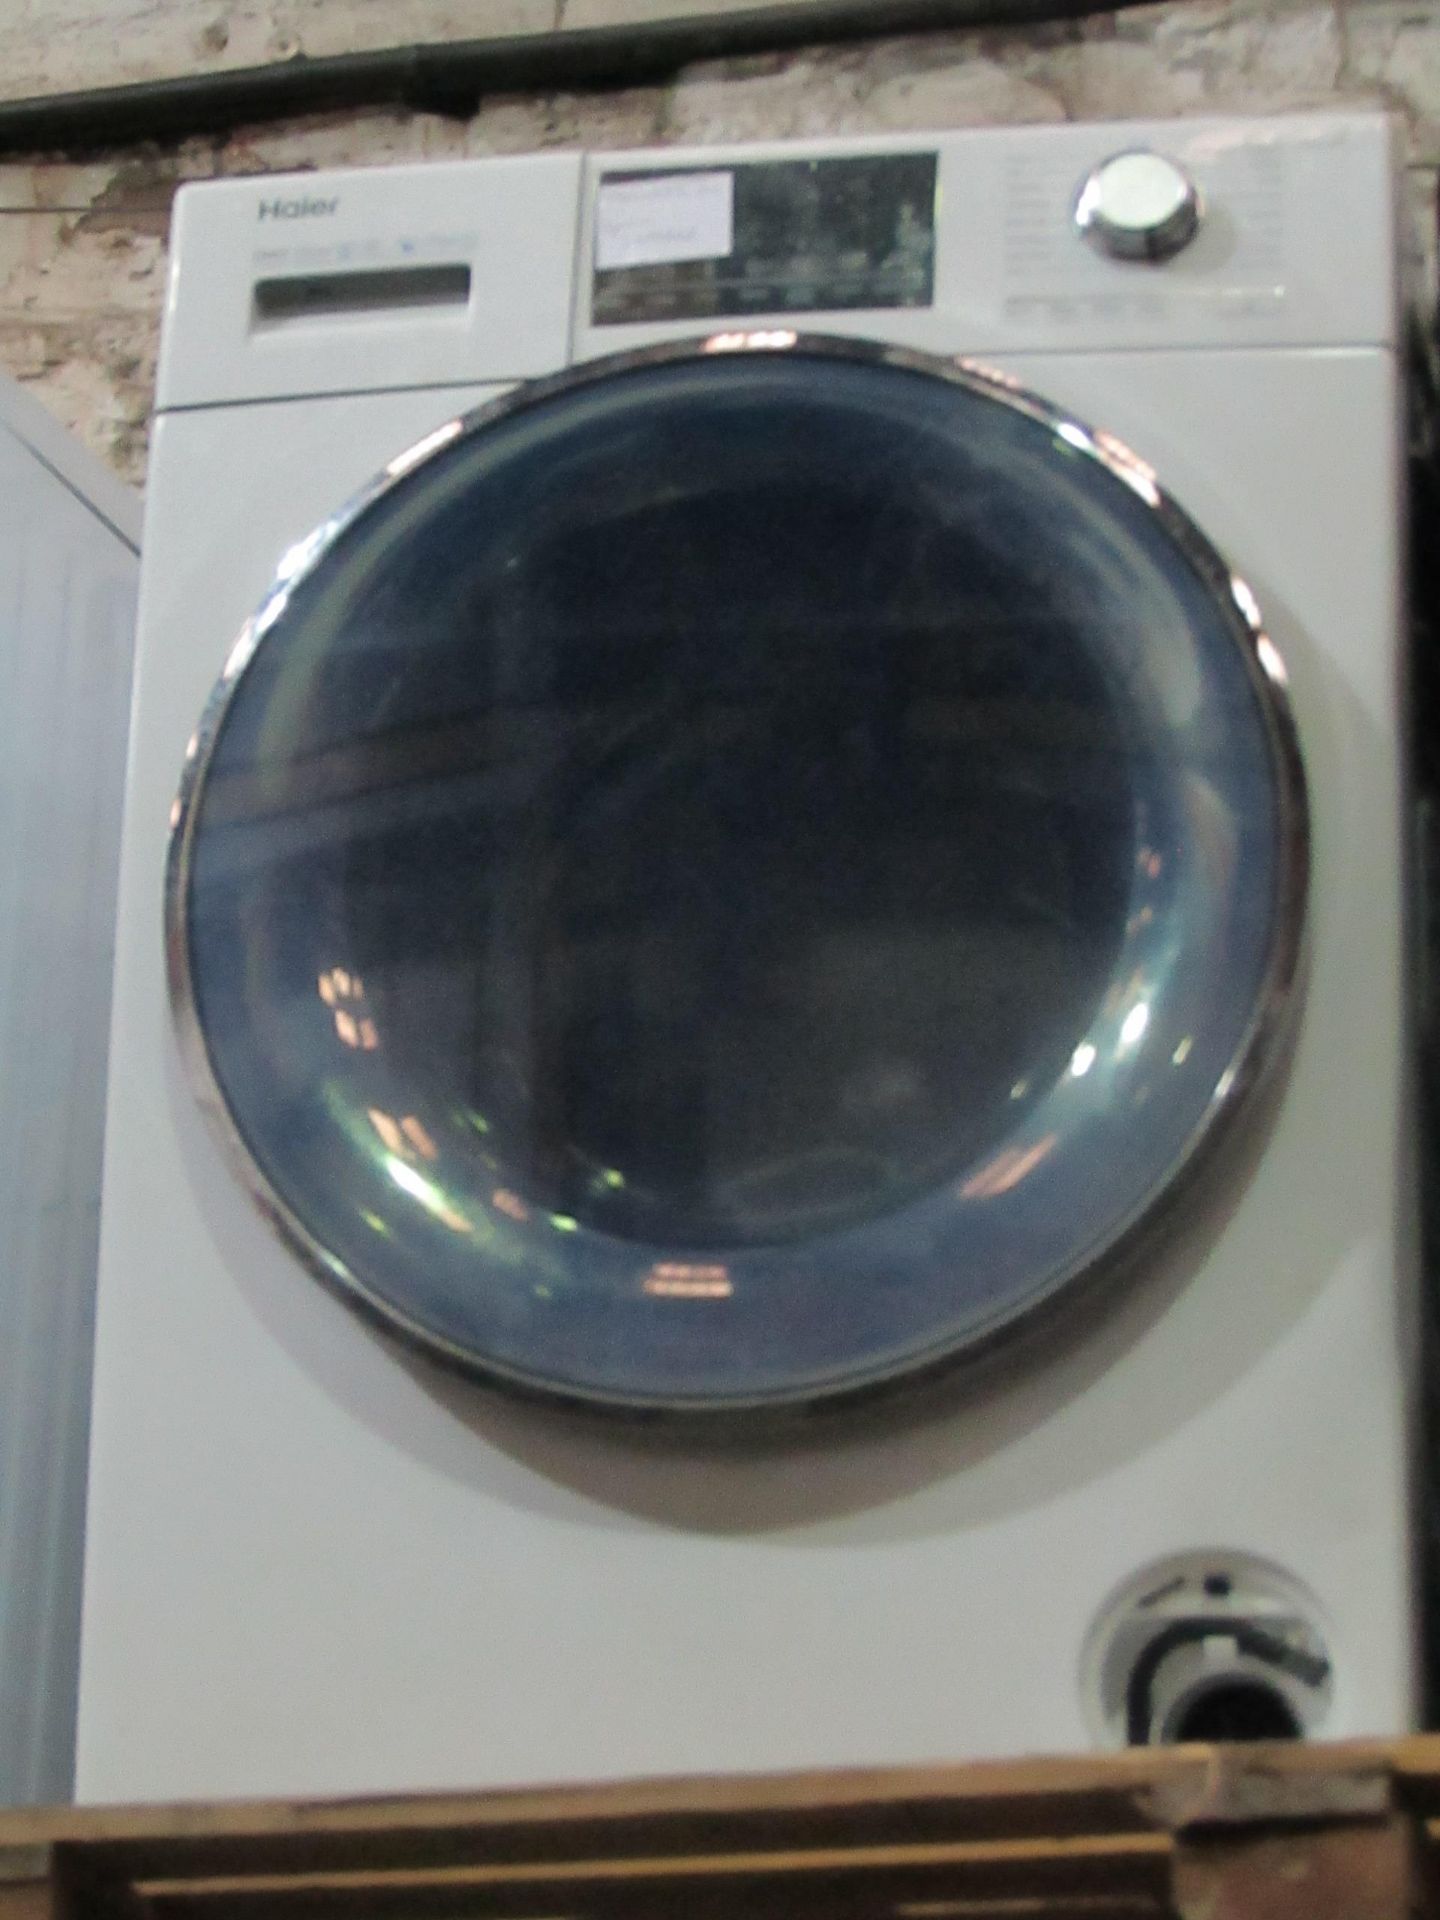 Haier washing machine, powers on but spin untested.